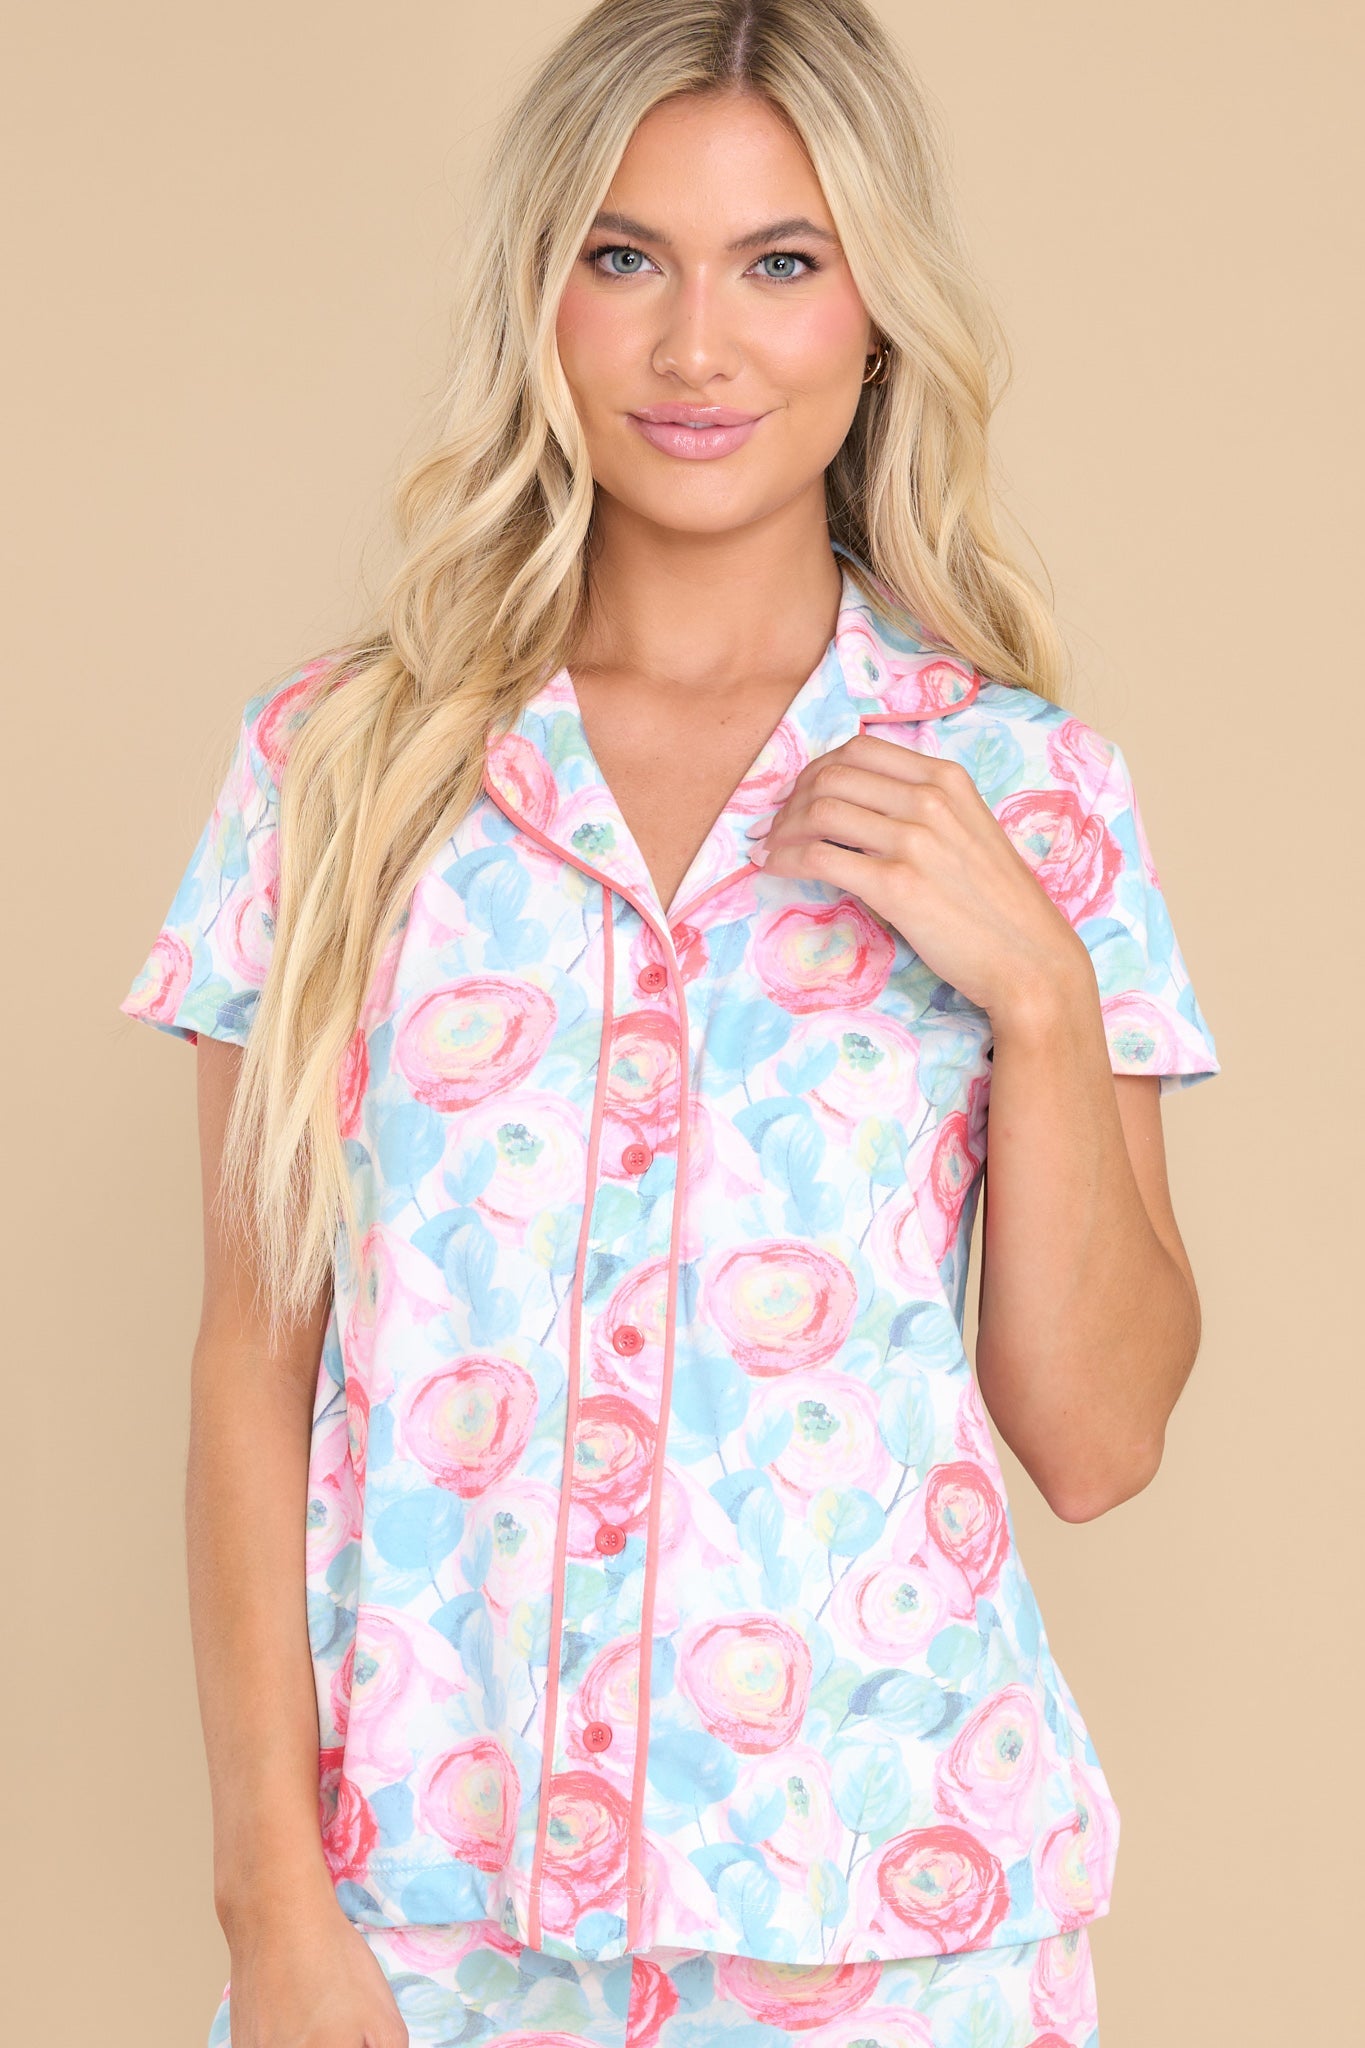 Am I Dreaming Pink Floral Print Pajama Top - Red Dress